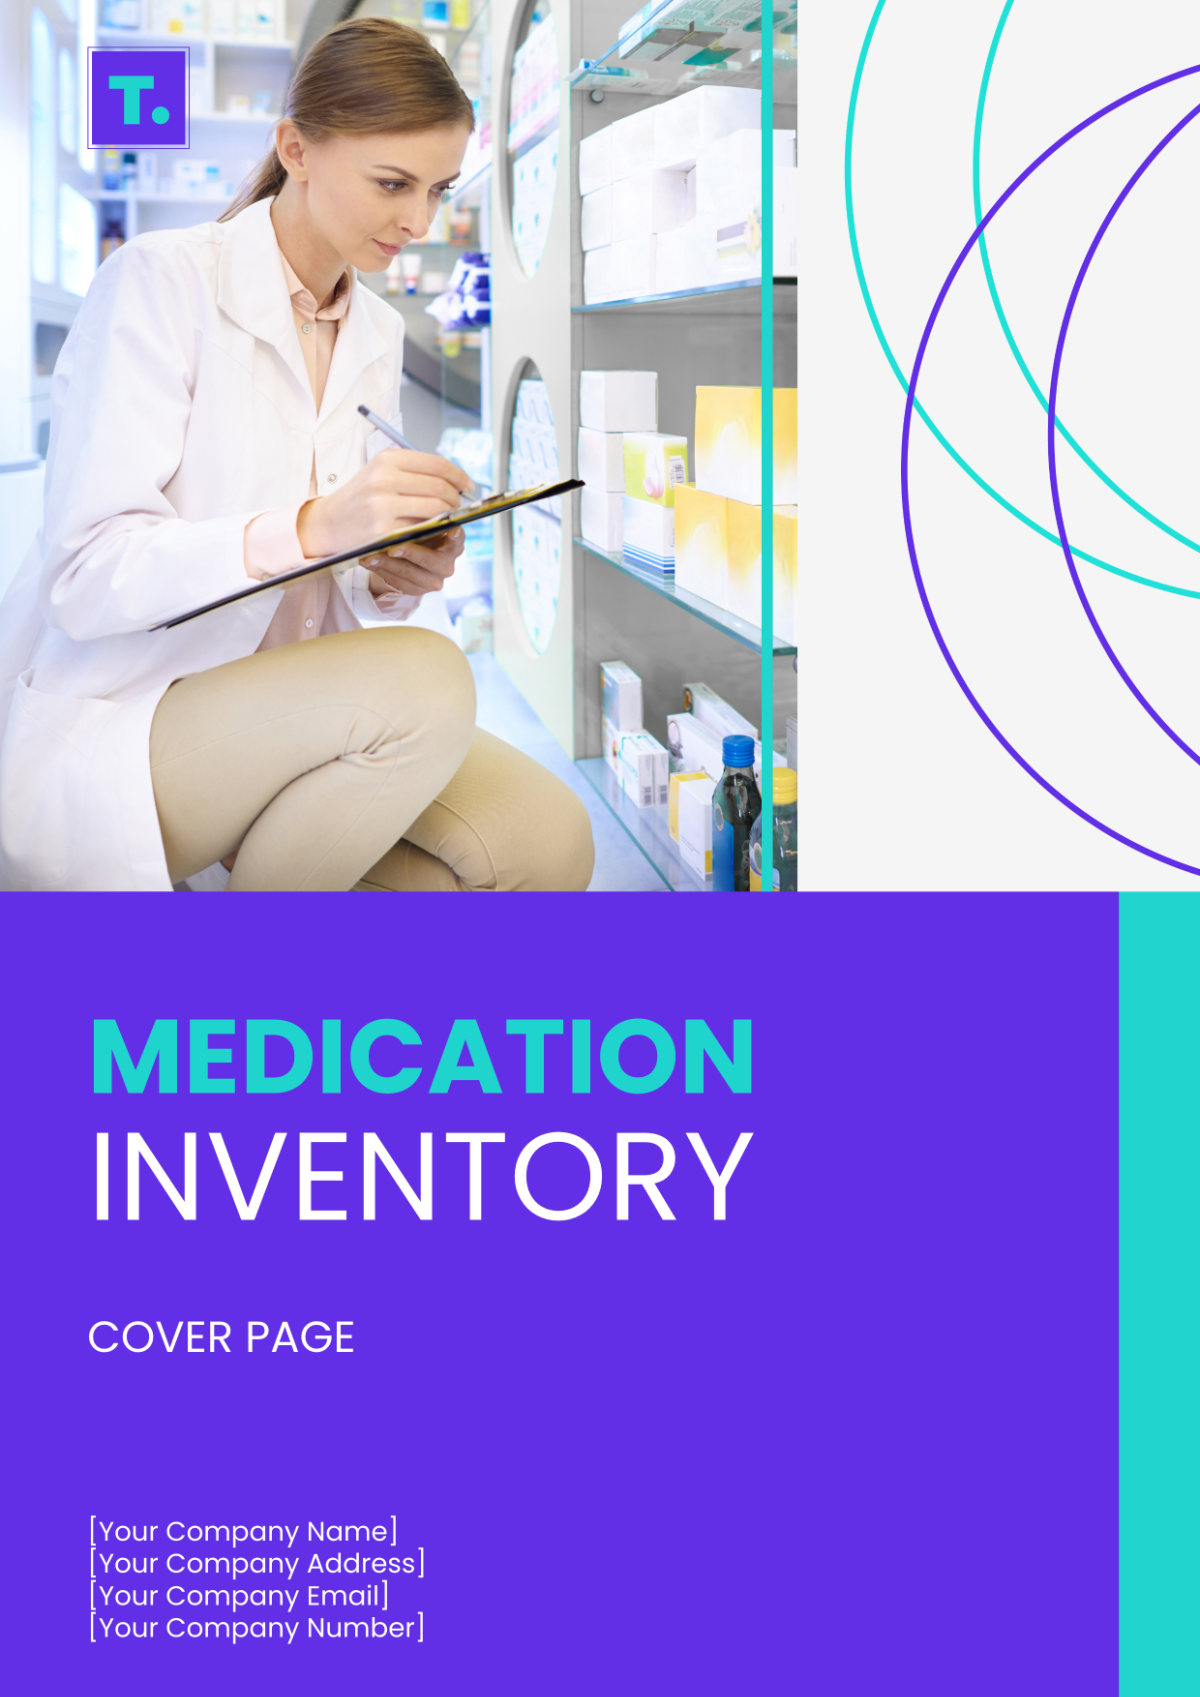 Medication Inventory Cover Page